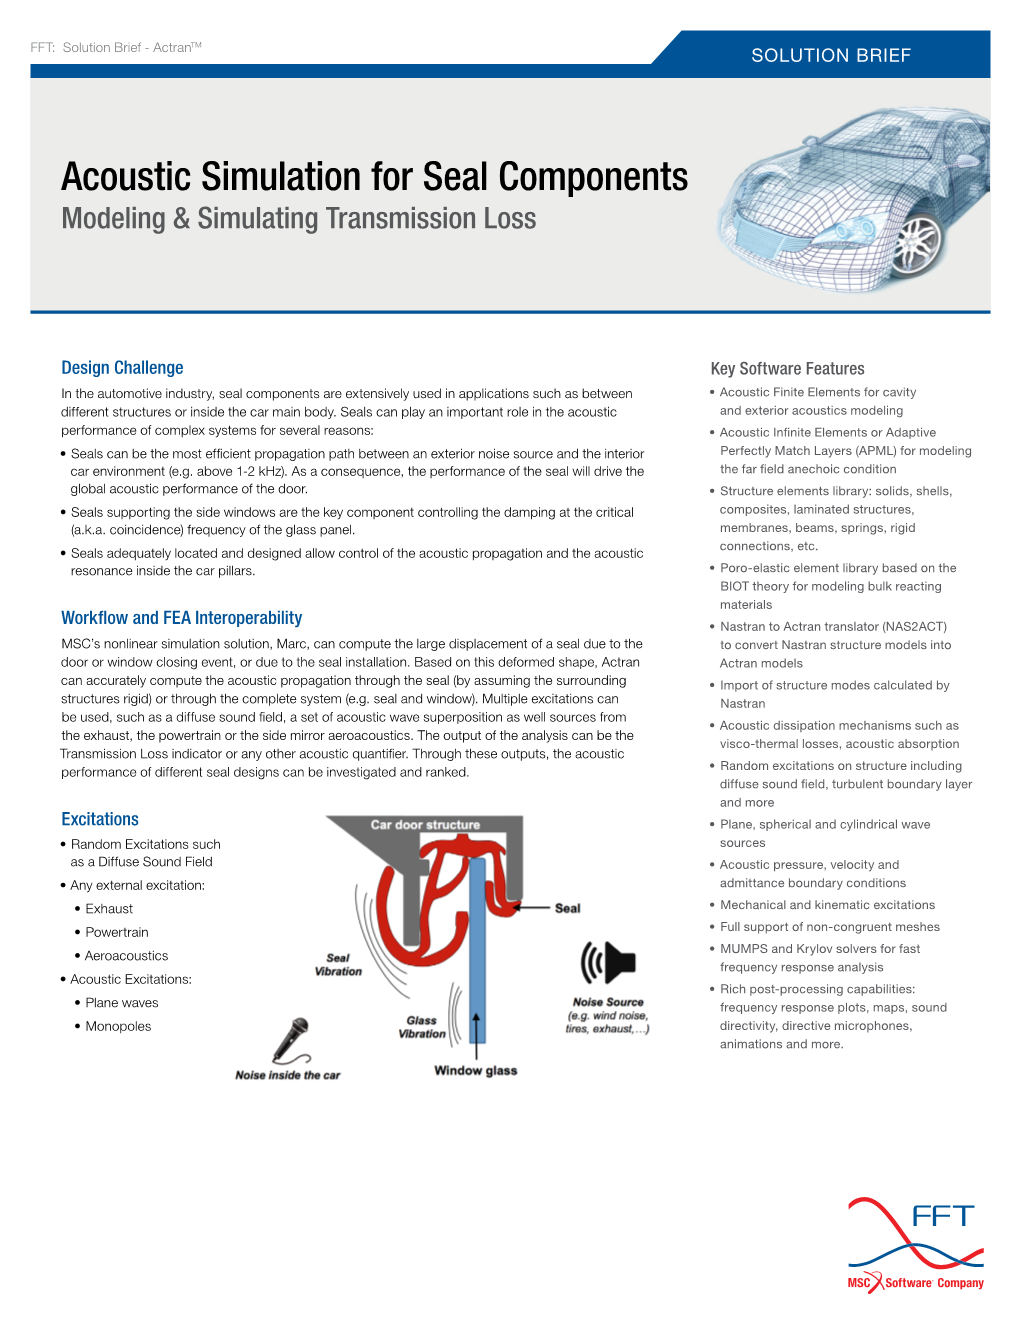 Acoustic Simulation for Seal Components Modeling & Simulating Transmission Loss